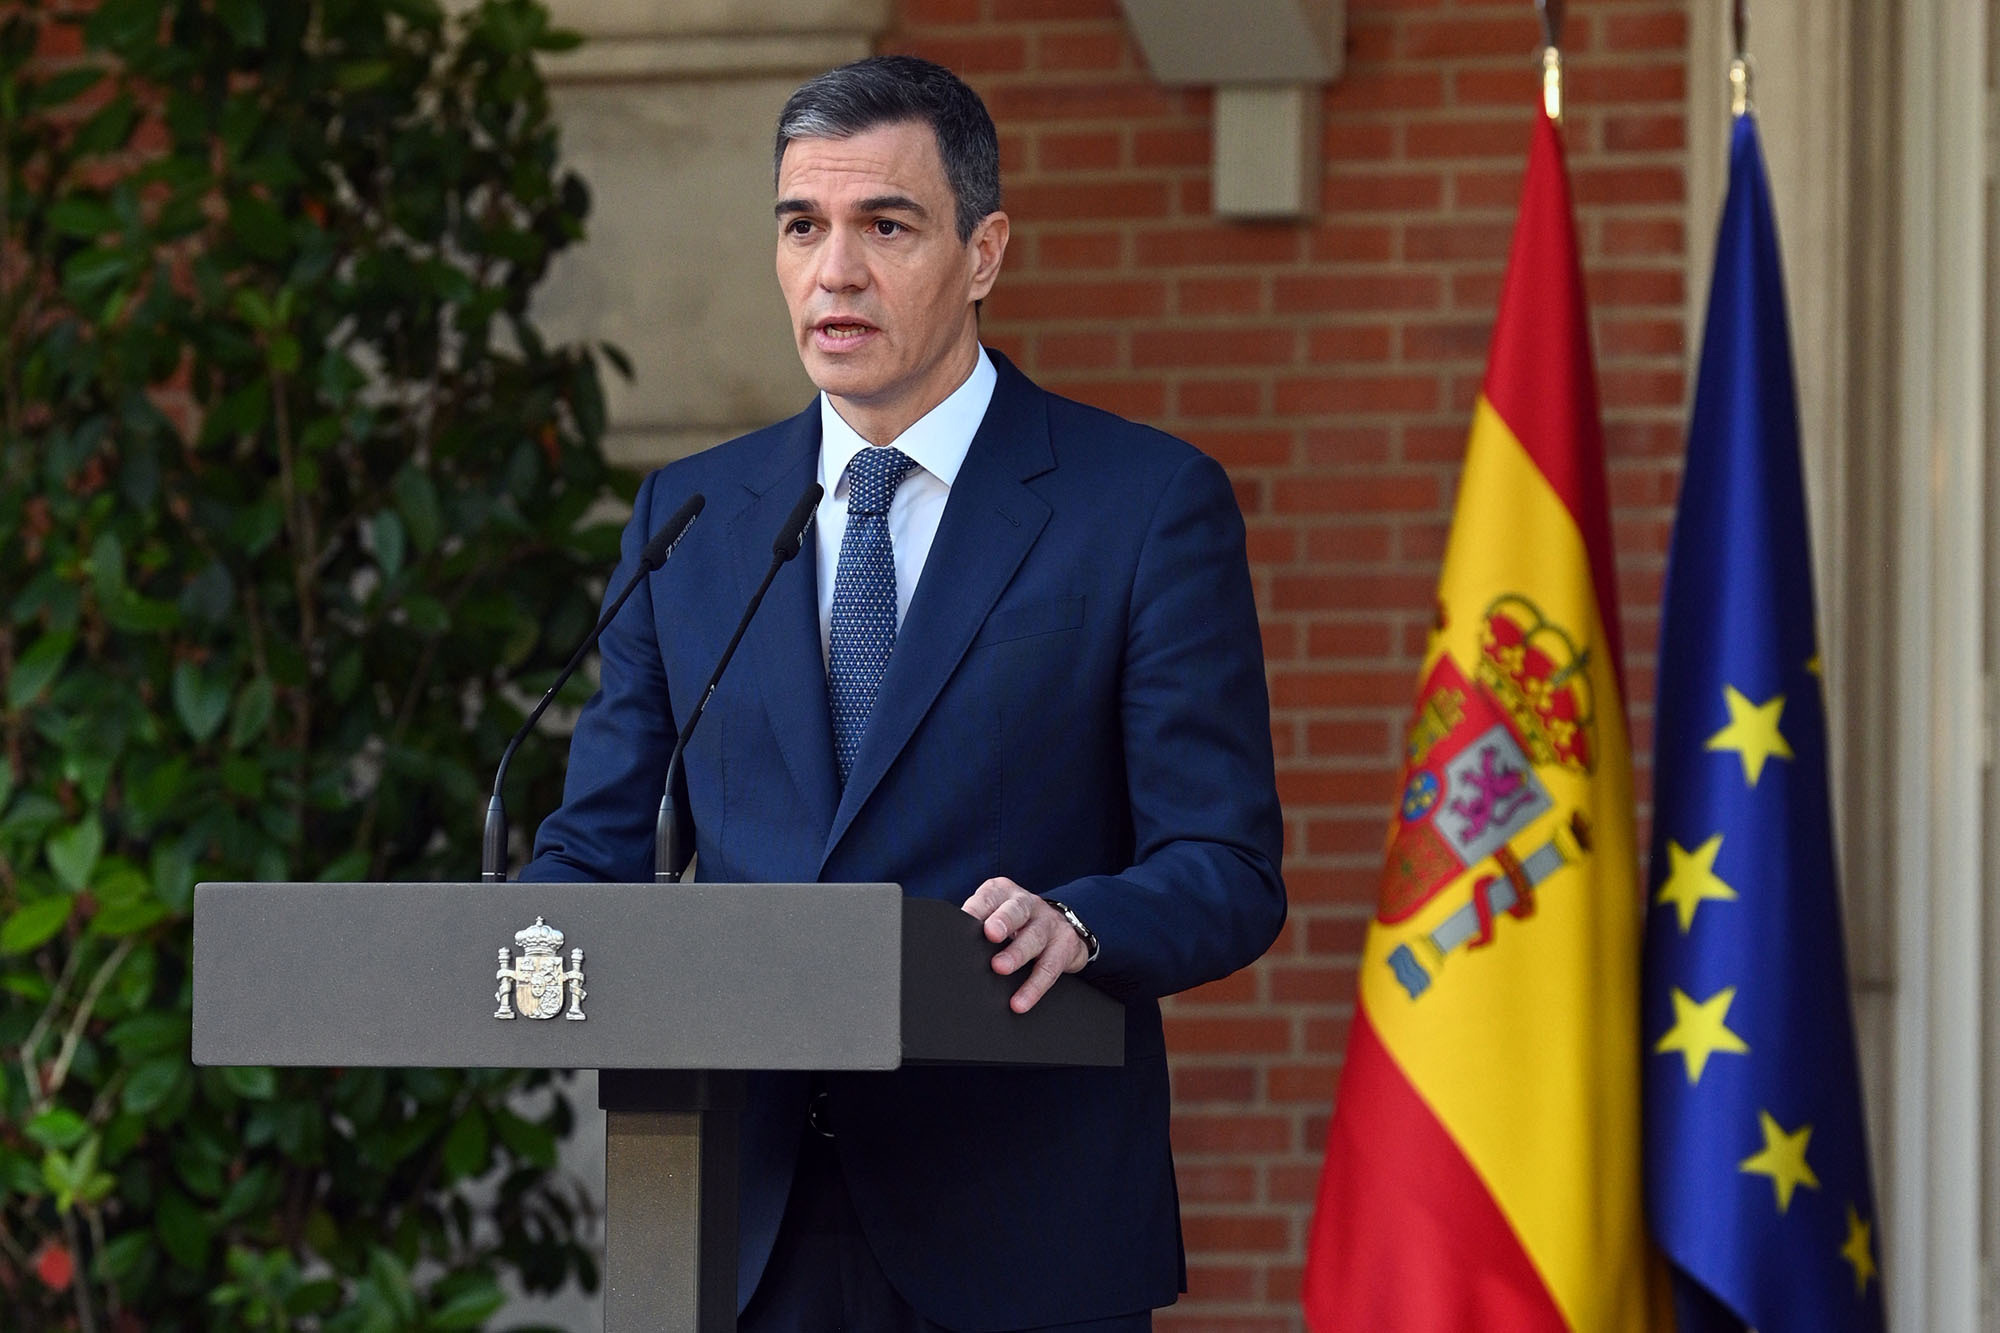 Spanish Prime Minister Pedro Sanchez delivers a speech regarding Spain's official recognition of a Palestinian state, at La Moncloa Palace in Madrid, on May 28.